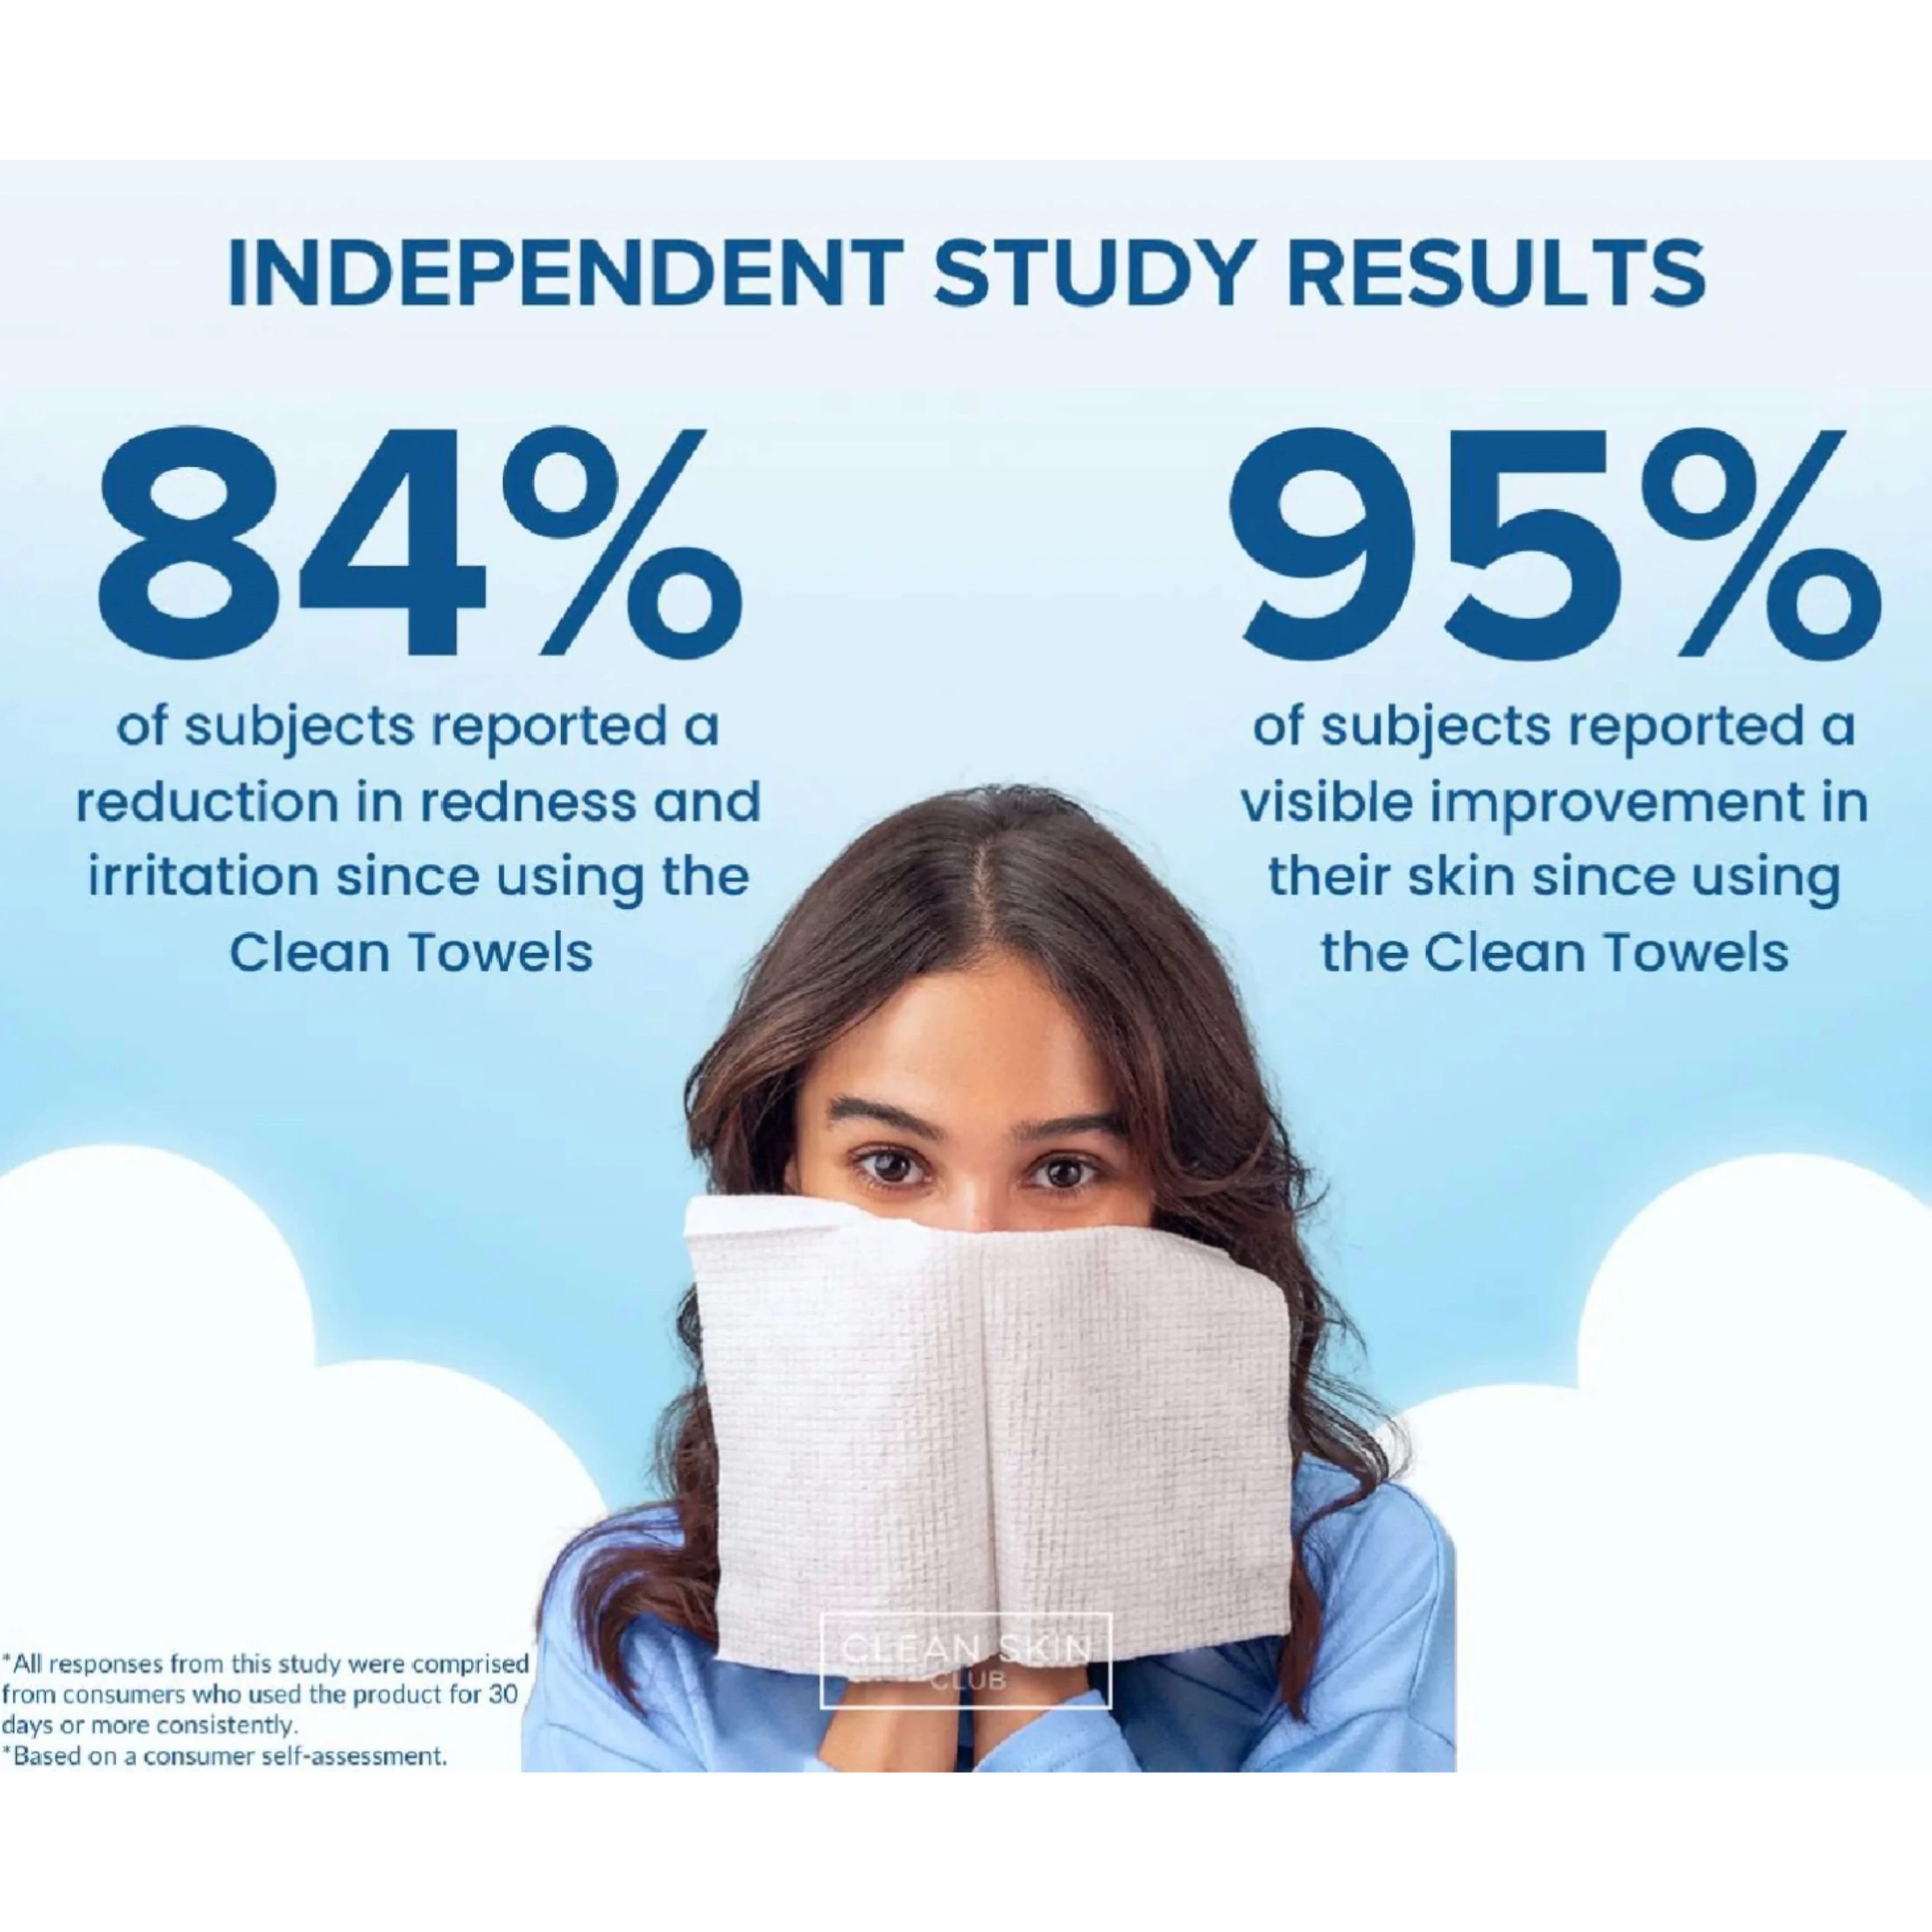 Independent Study Results